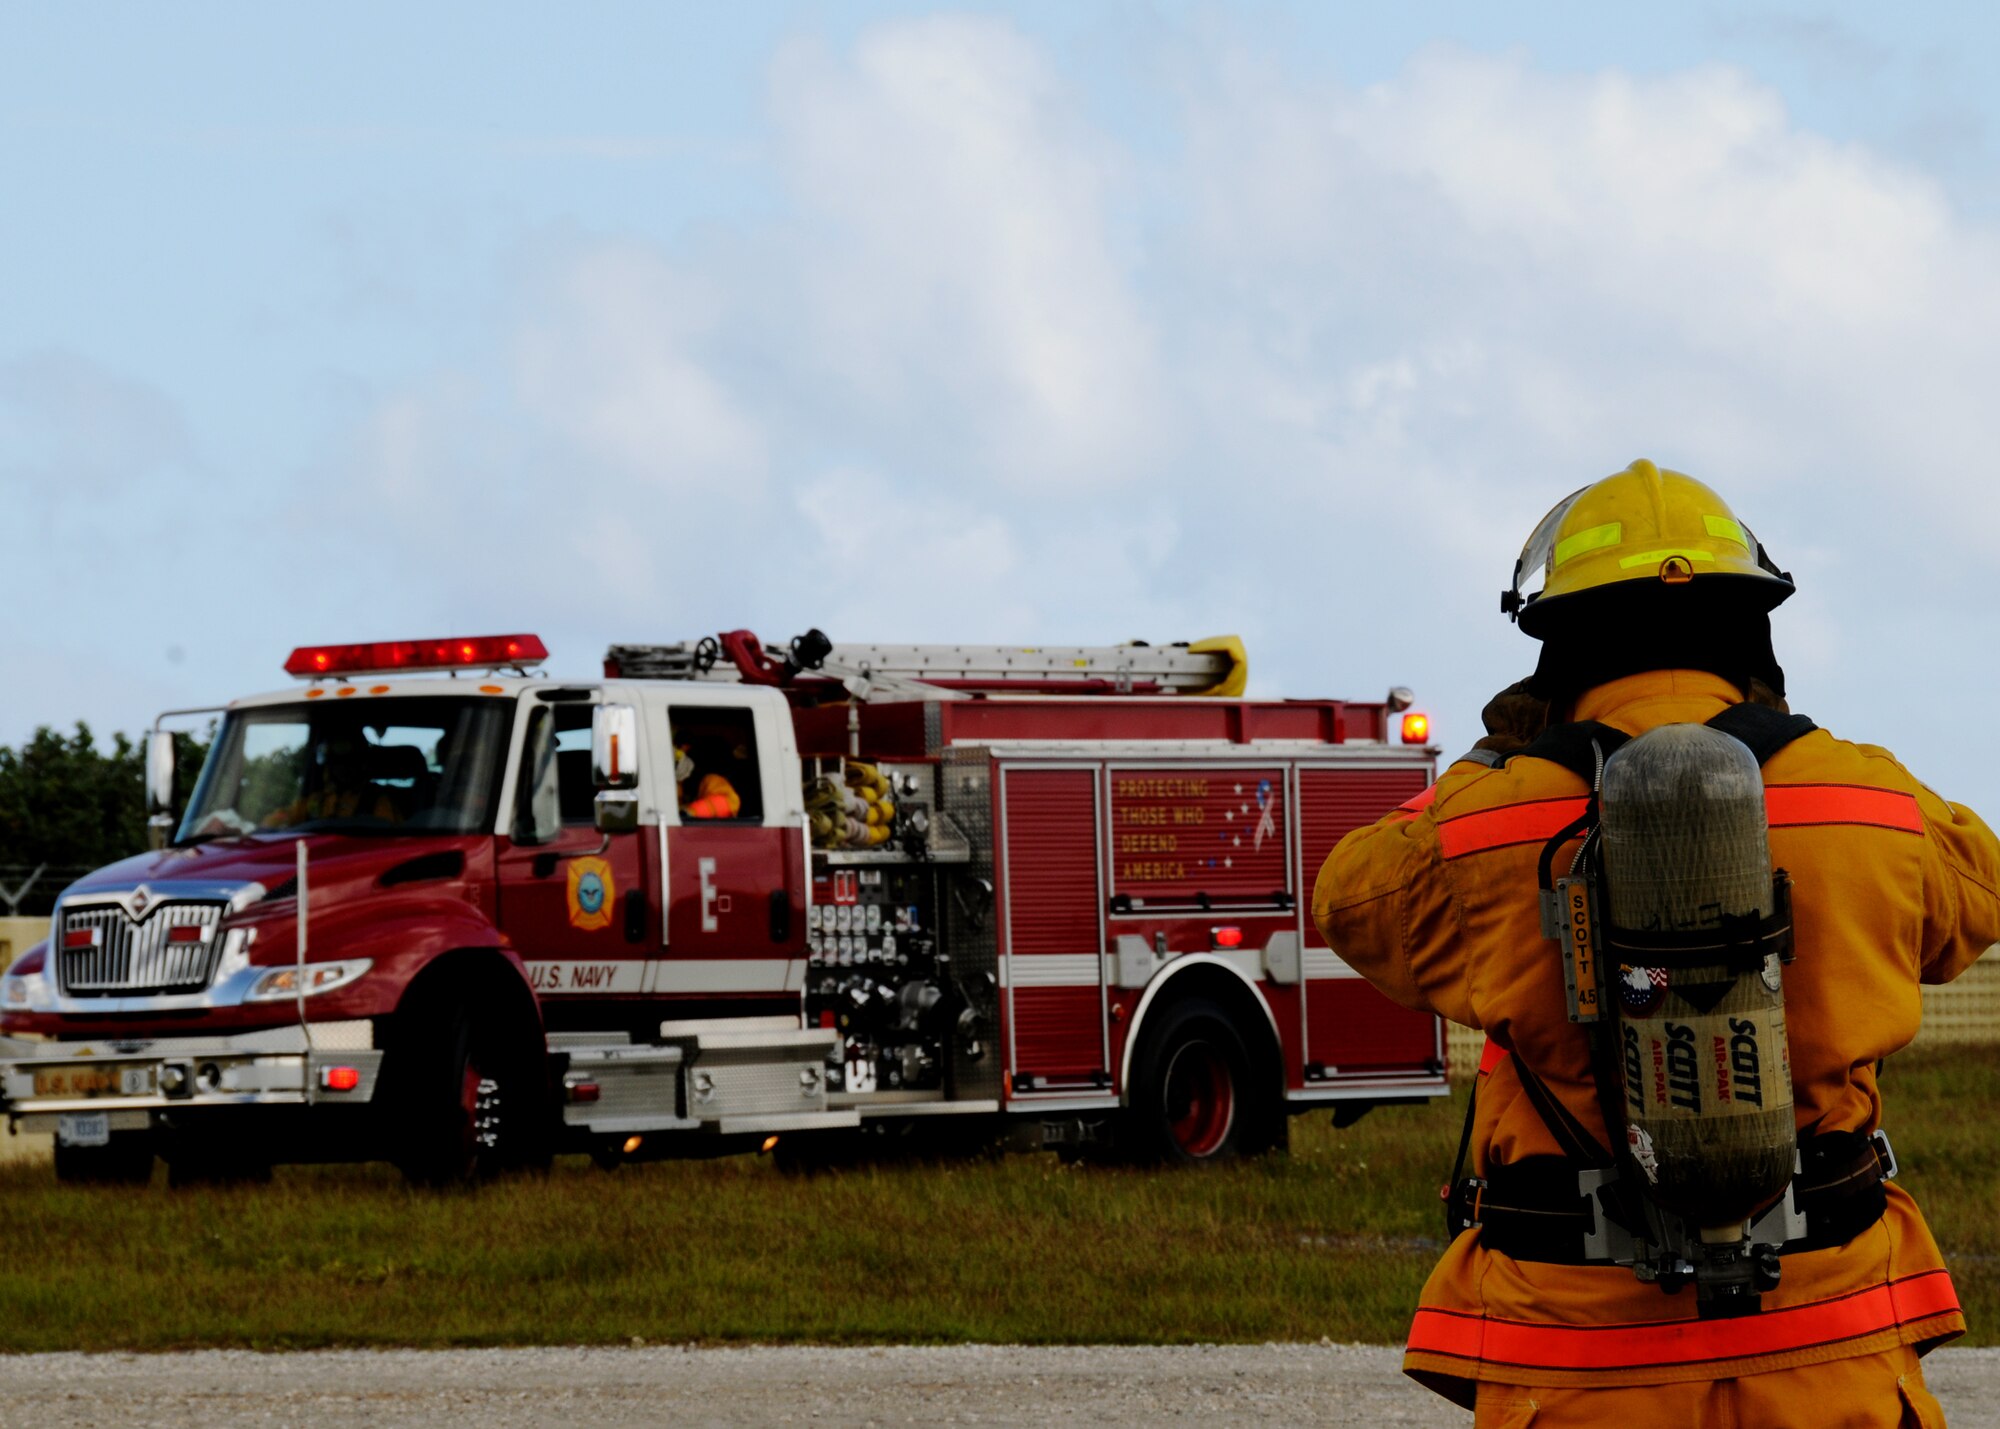 ANDERSEN AIR FORCE BASE, Guam - U.S. Navy Firemen simulate the arrival on scene during structural training here Nov. 20. Andersen is home to the only fire simulator training facilities in both aircraft and structural fires on Guam. (U.S. Air Force photo by Senior Airman Nichelle Griffiths)